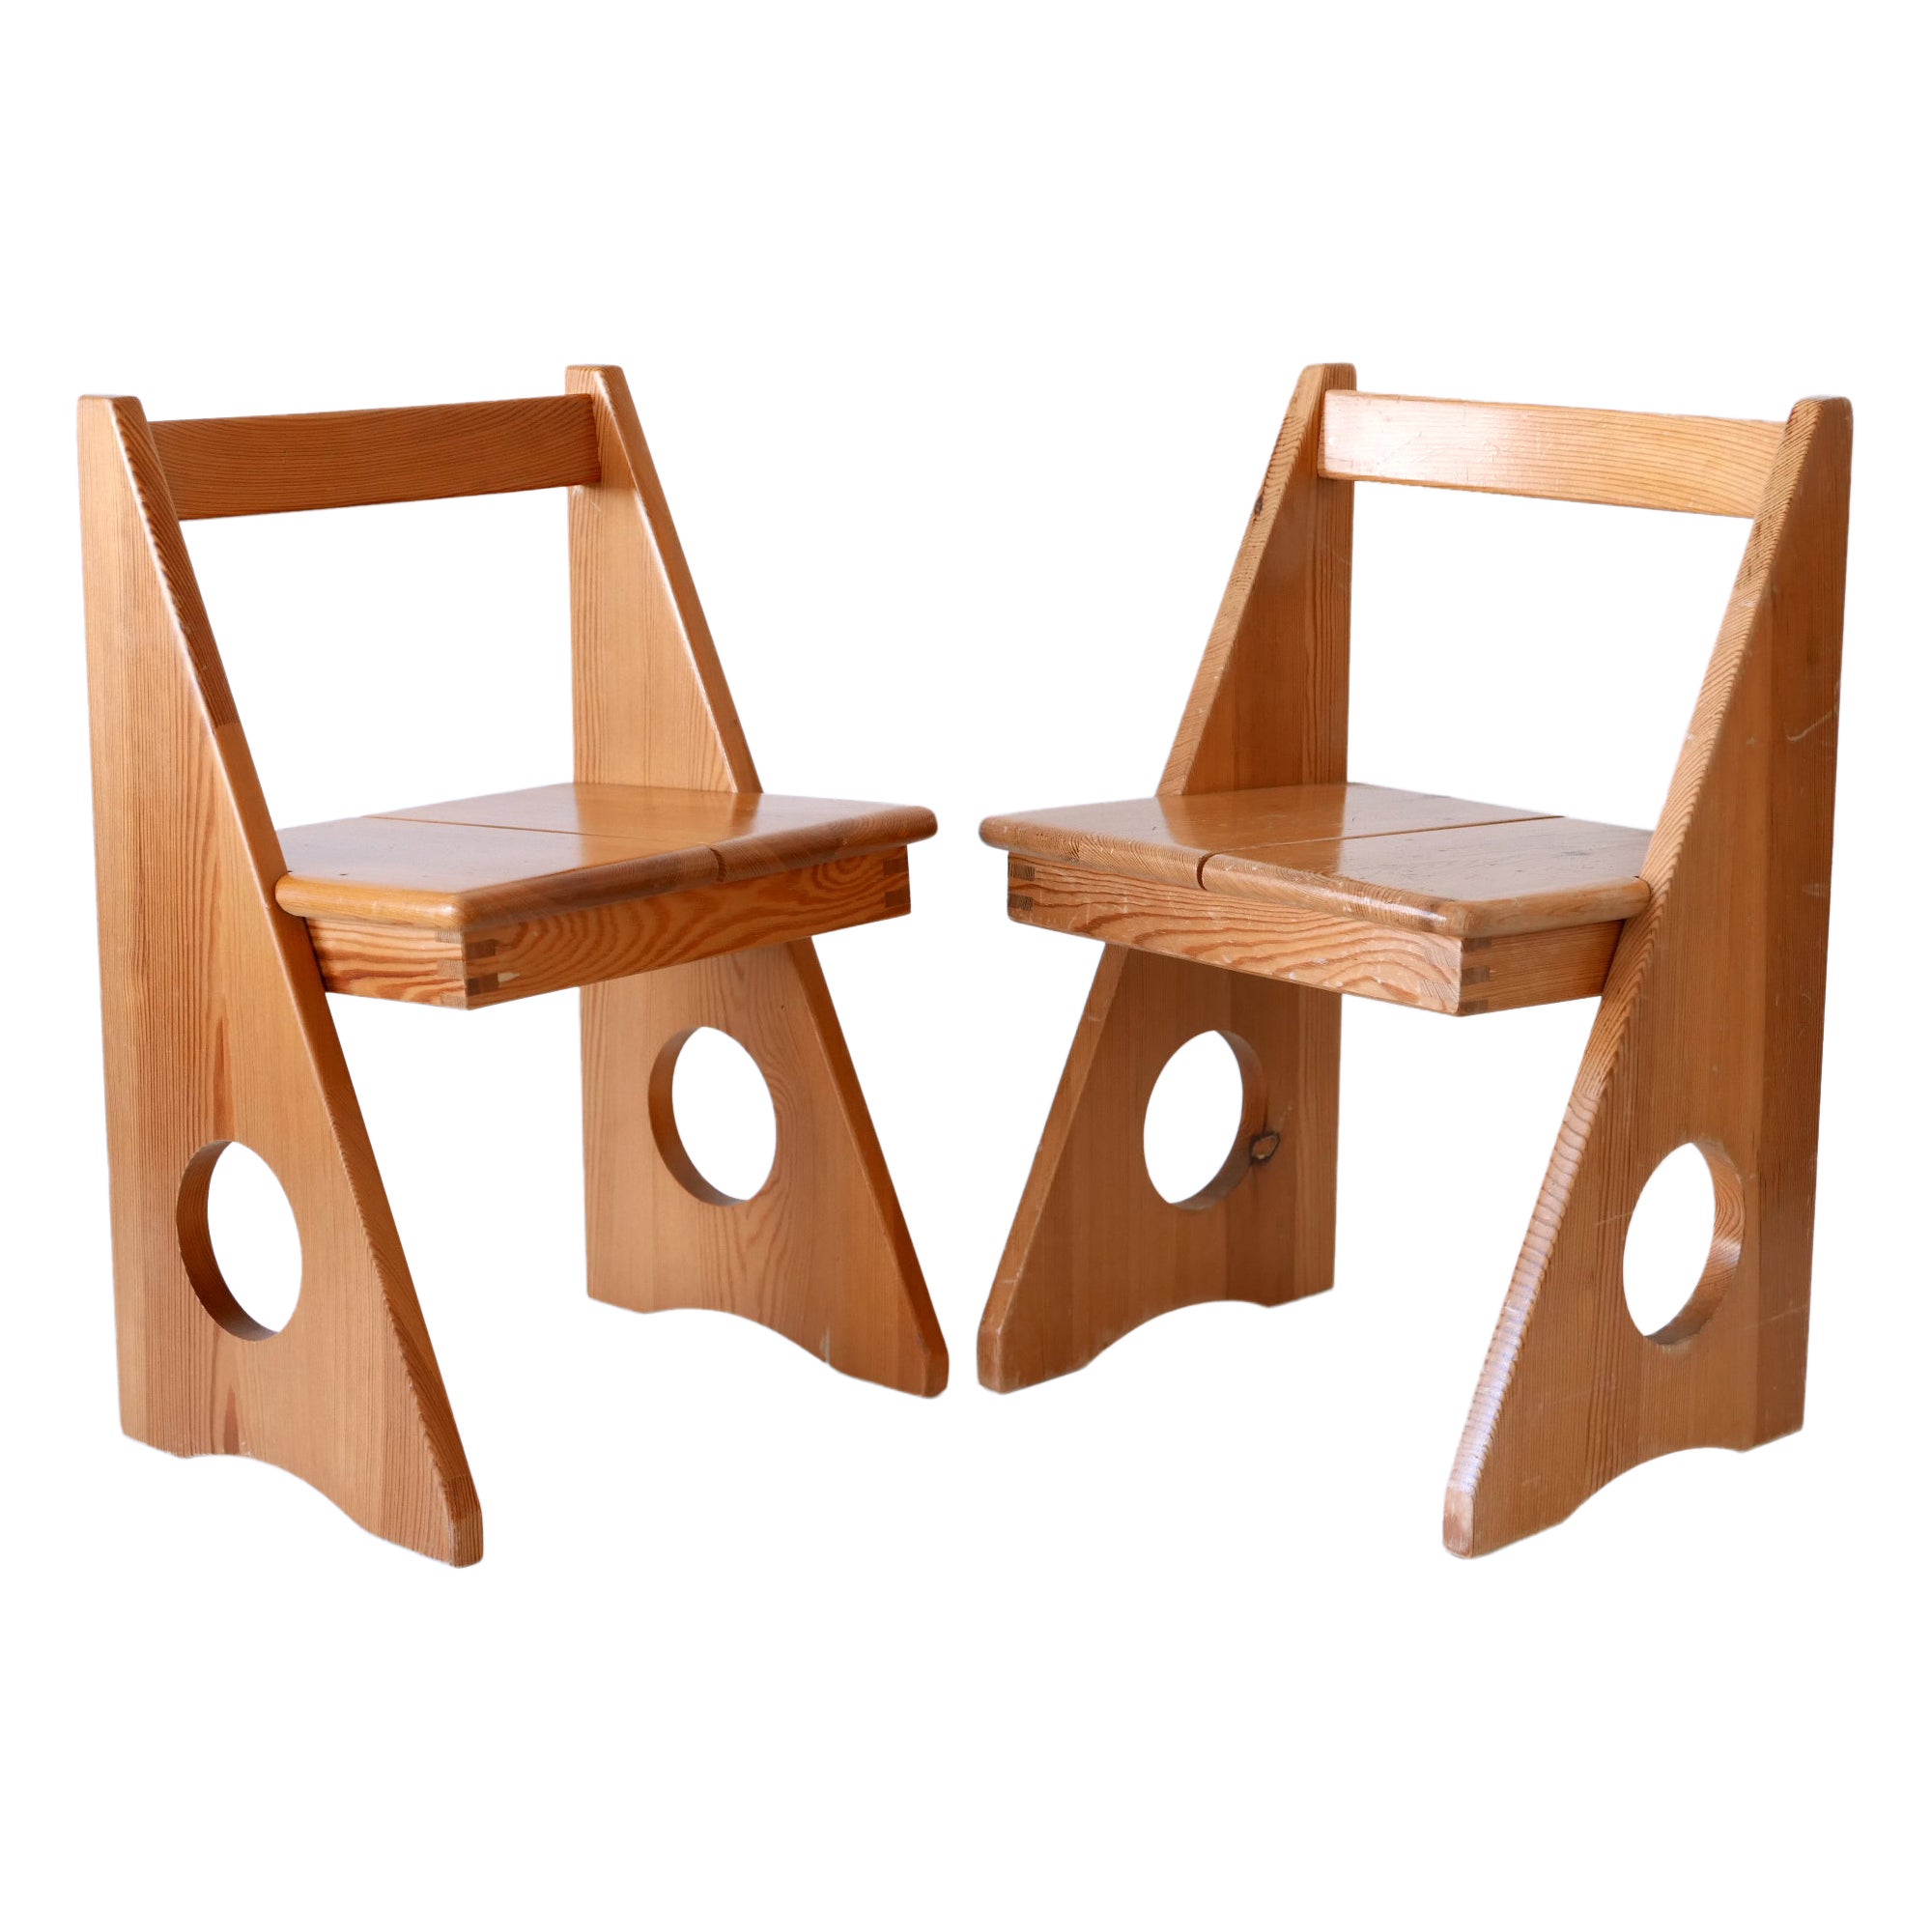 Set of Two Children's Chairs by Gilbert Marklund for Furusnickarn Sweden, 1970s For Sale